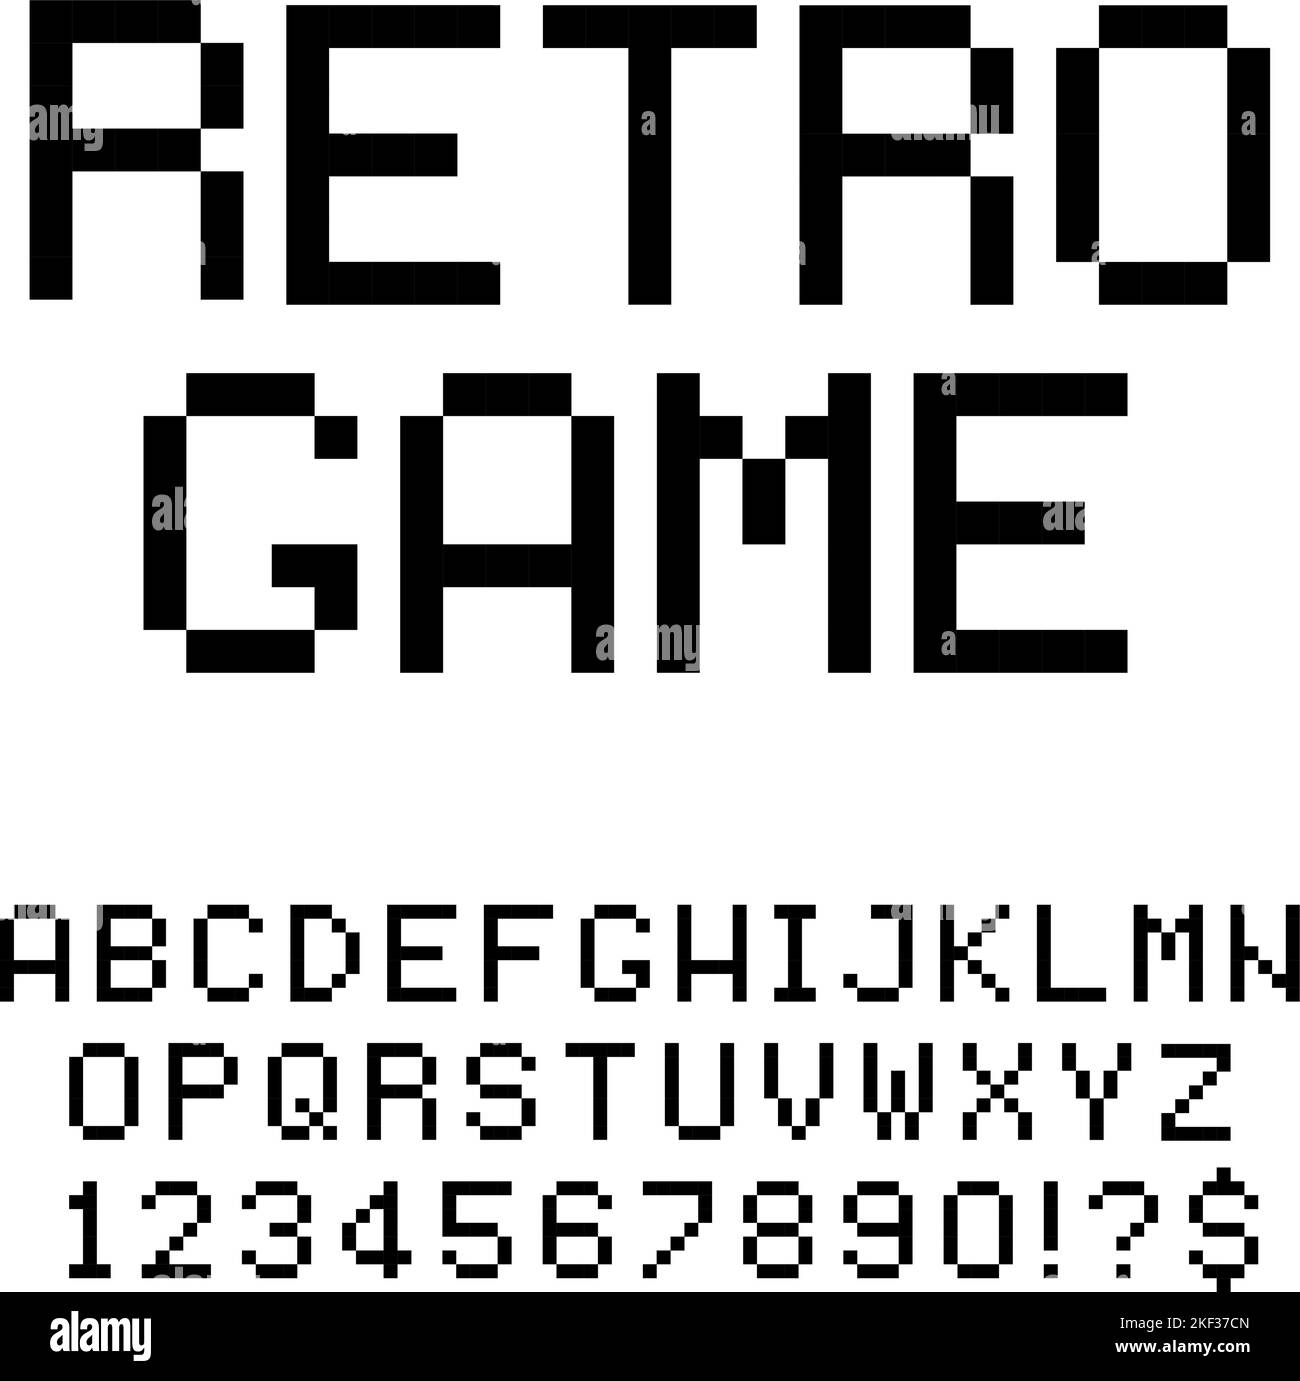 Retro game pixel art font. Pixelated text alphabet letters and numbers, one pixel typography style vector set Stock Vector